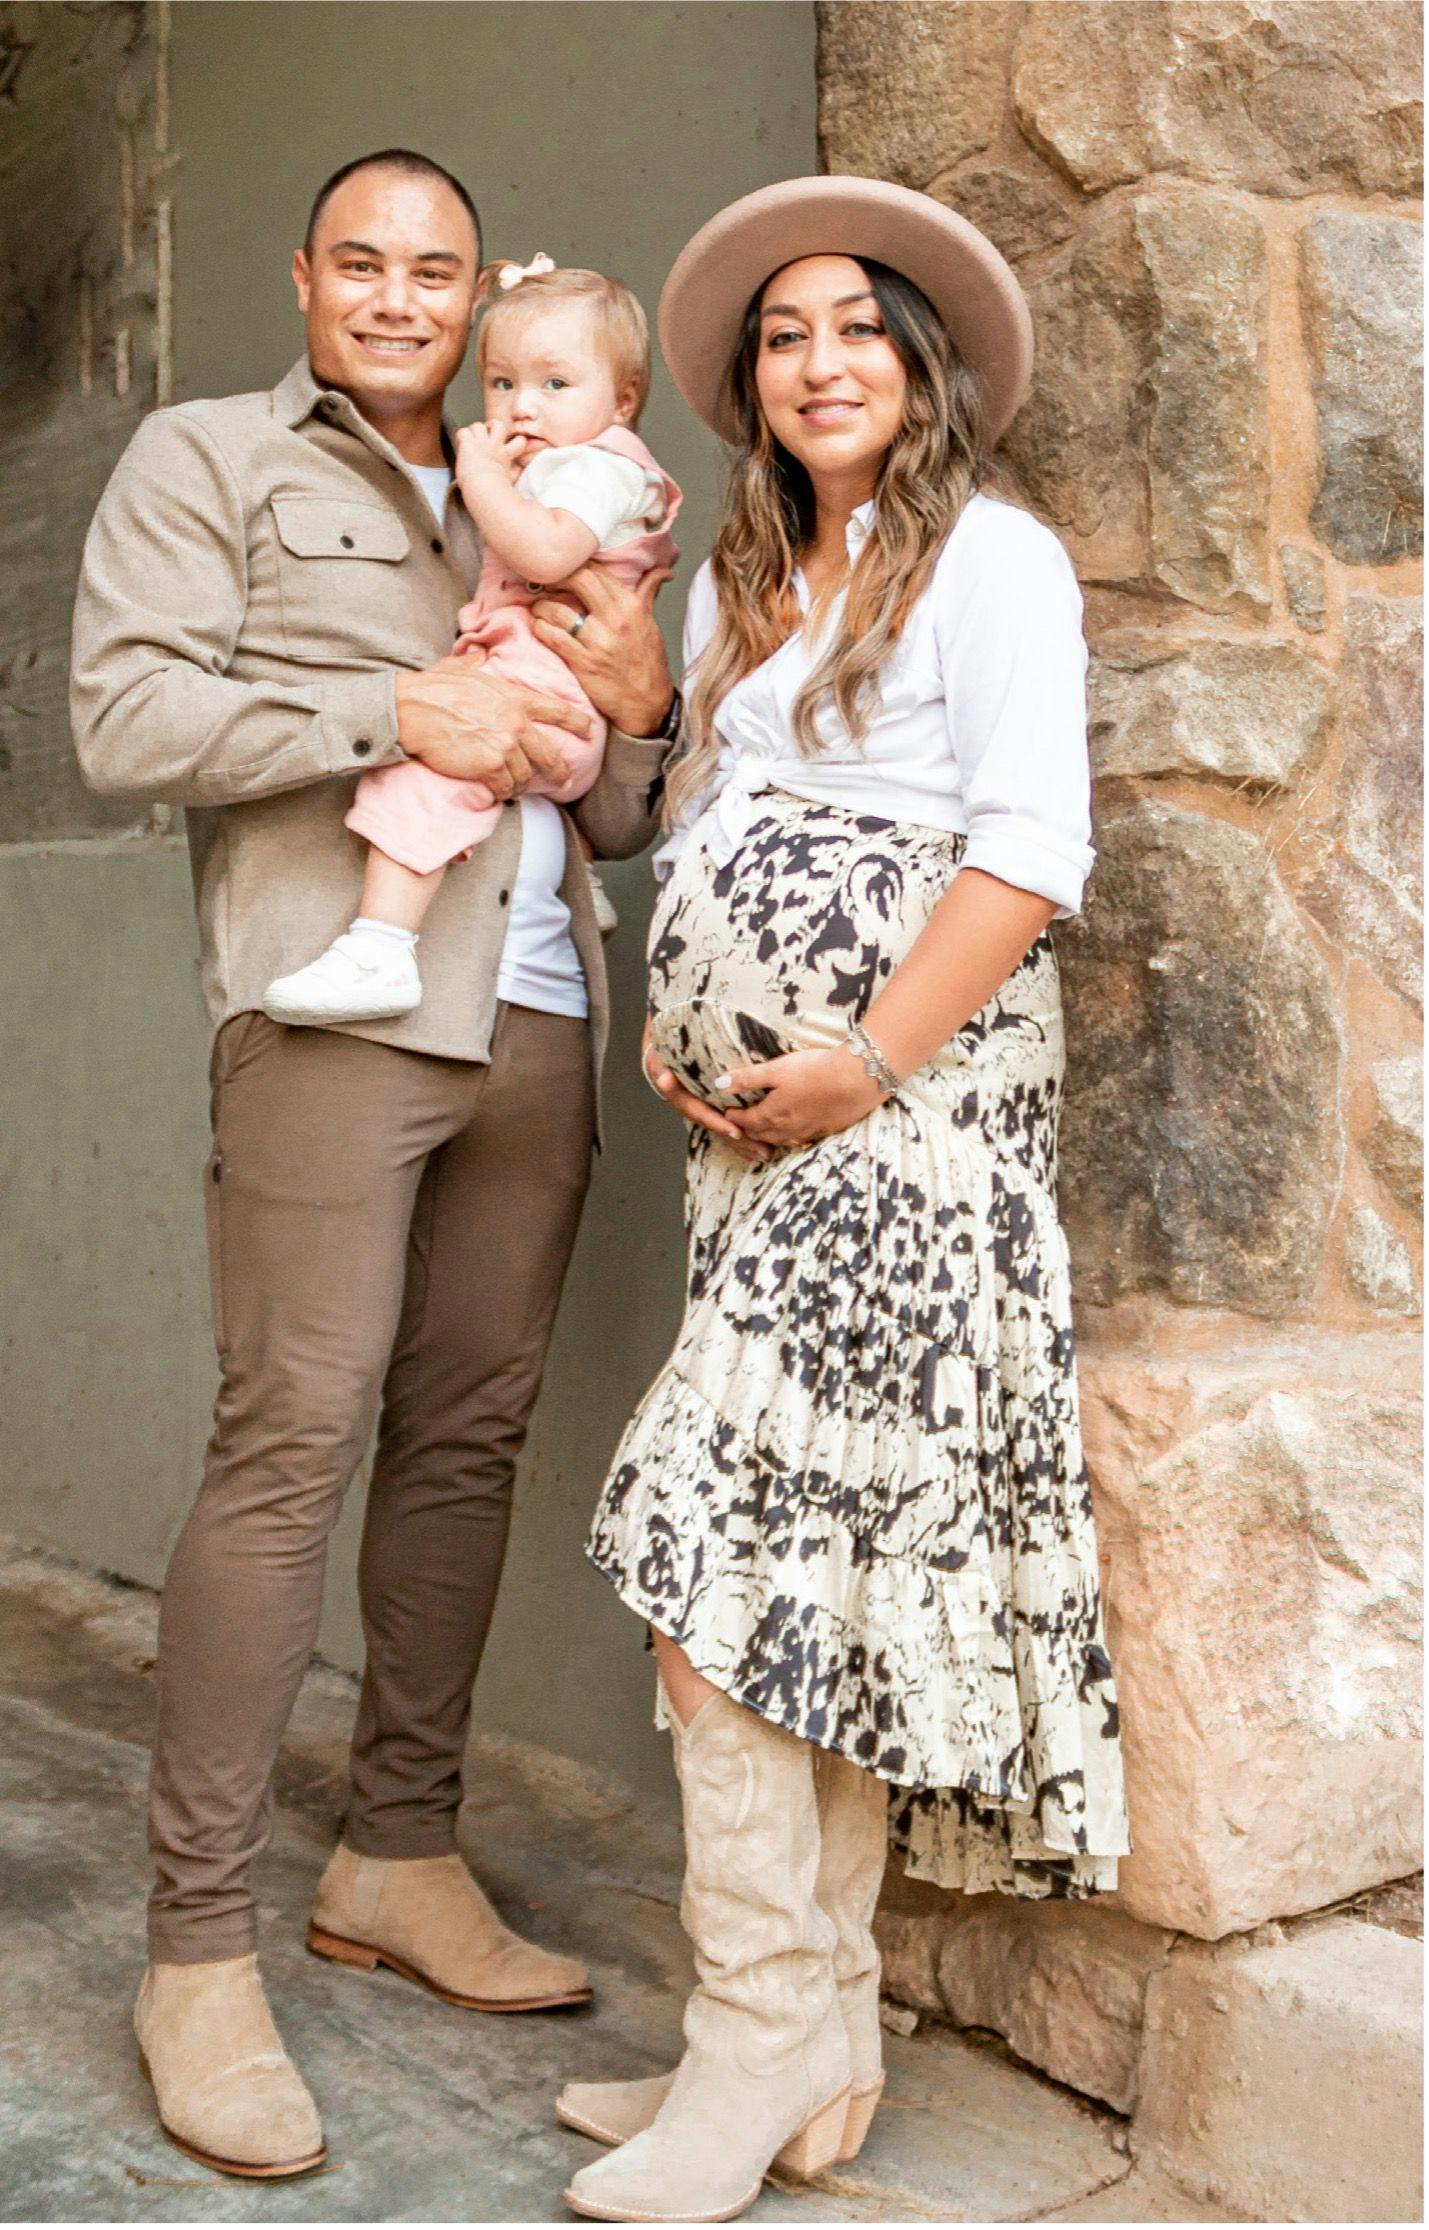 A pregnant Maresa King standing next to her husband who is holding their daughter